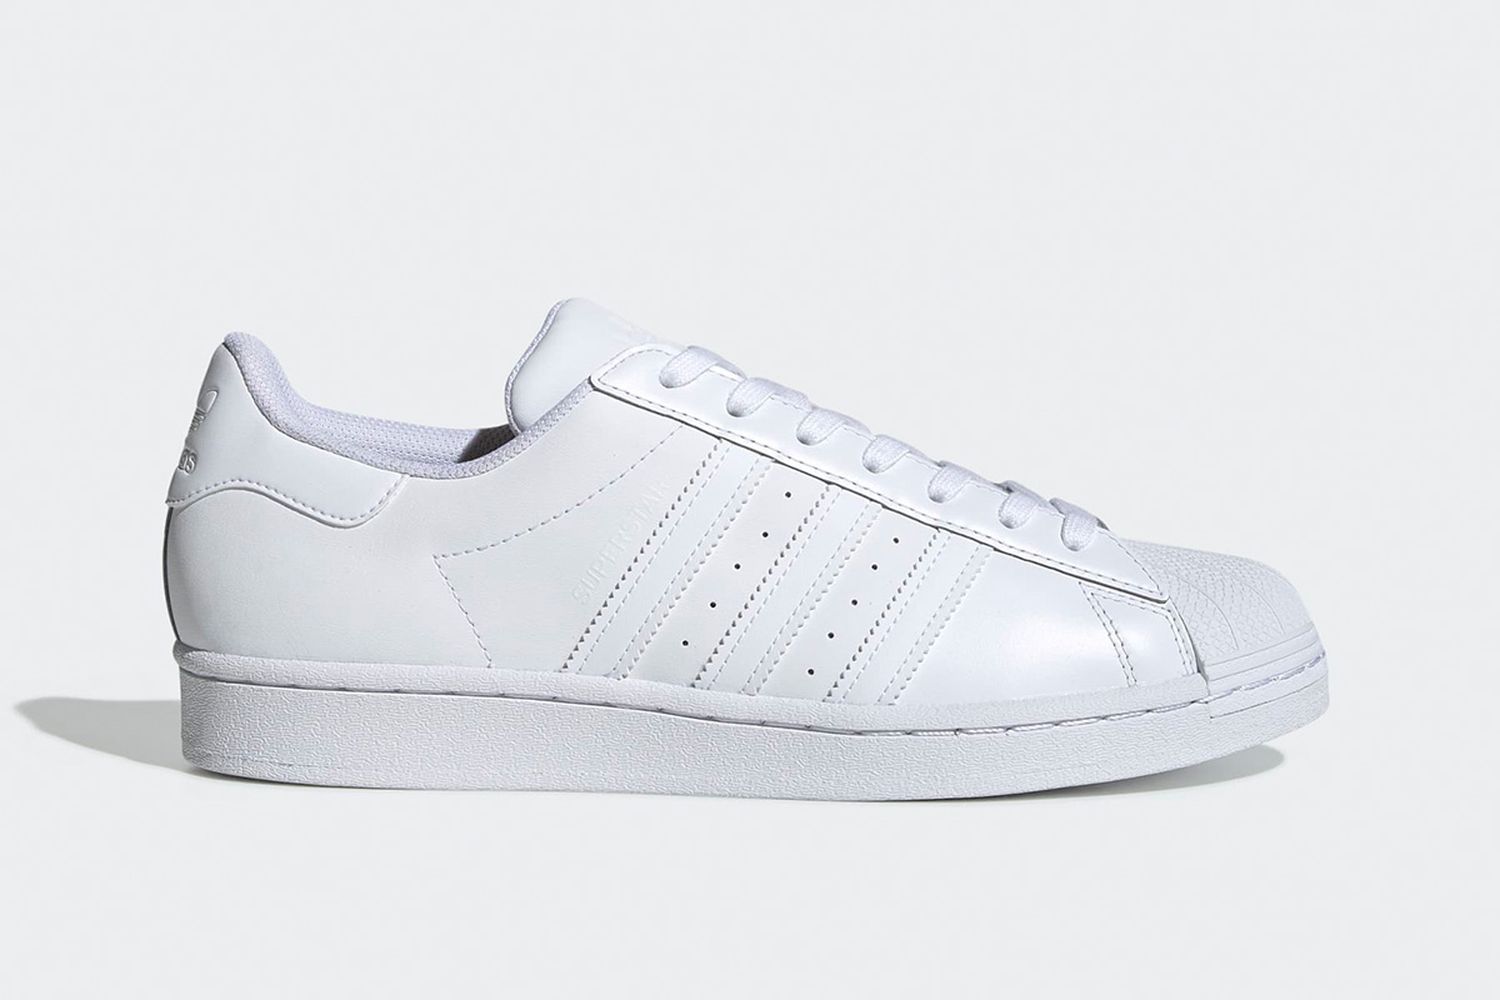 Leave Hype Behind & Shop Our Favorite adidas Superstar colorways